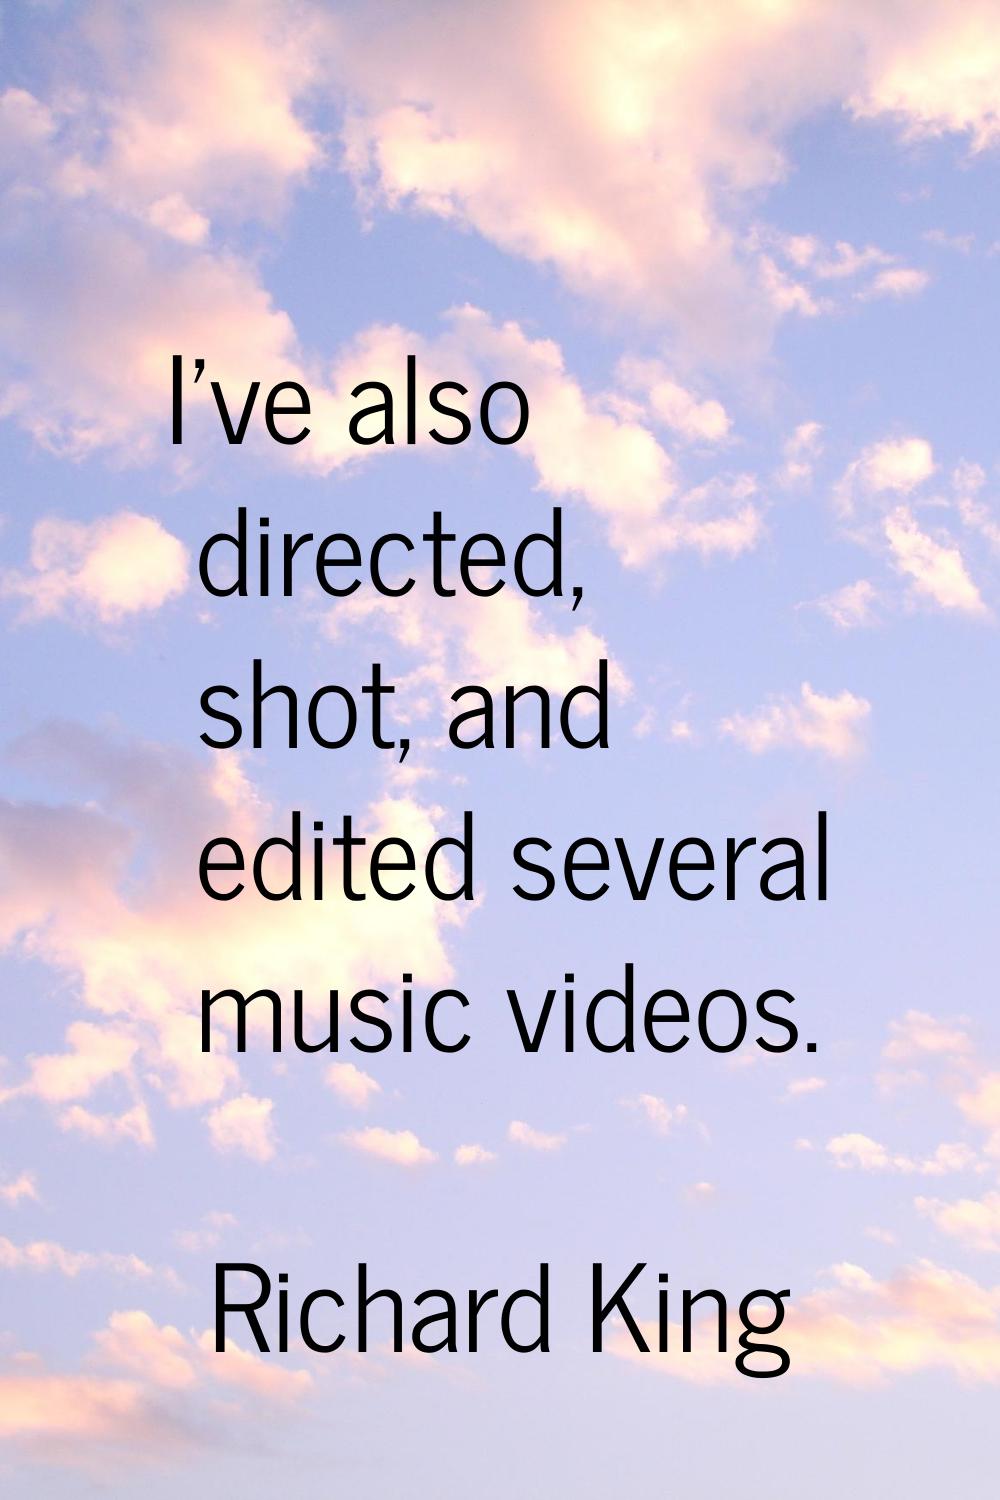 I've also directed, shot, and edited several music videos.